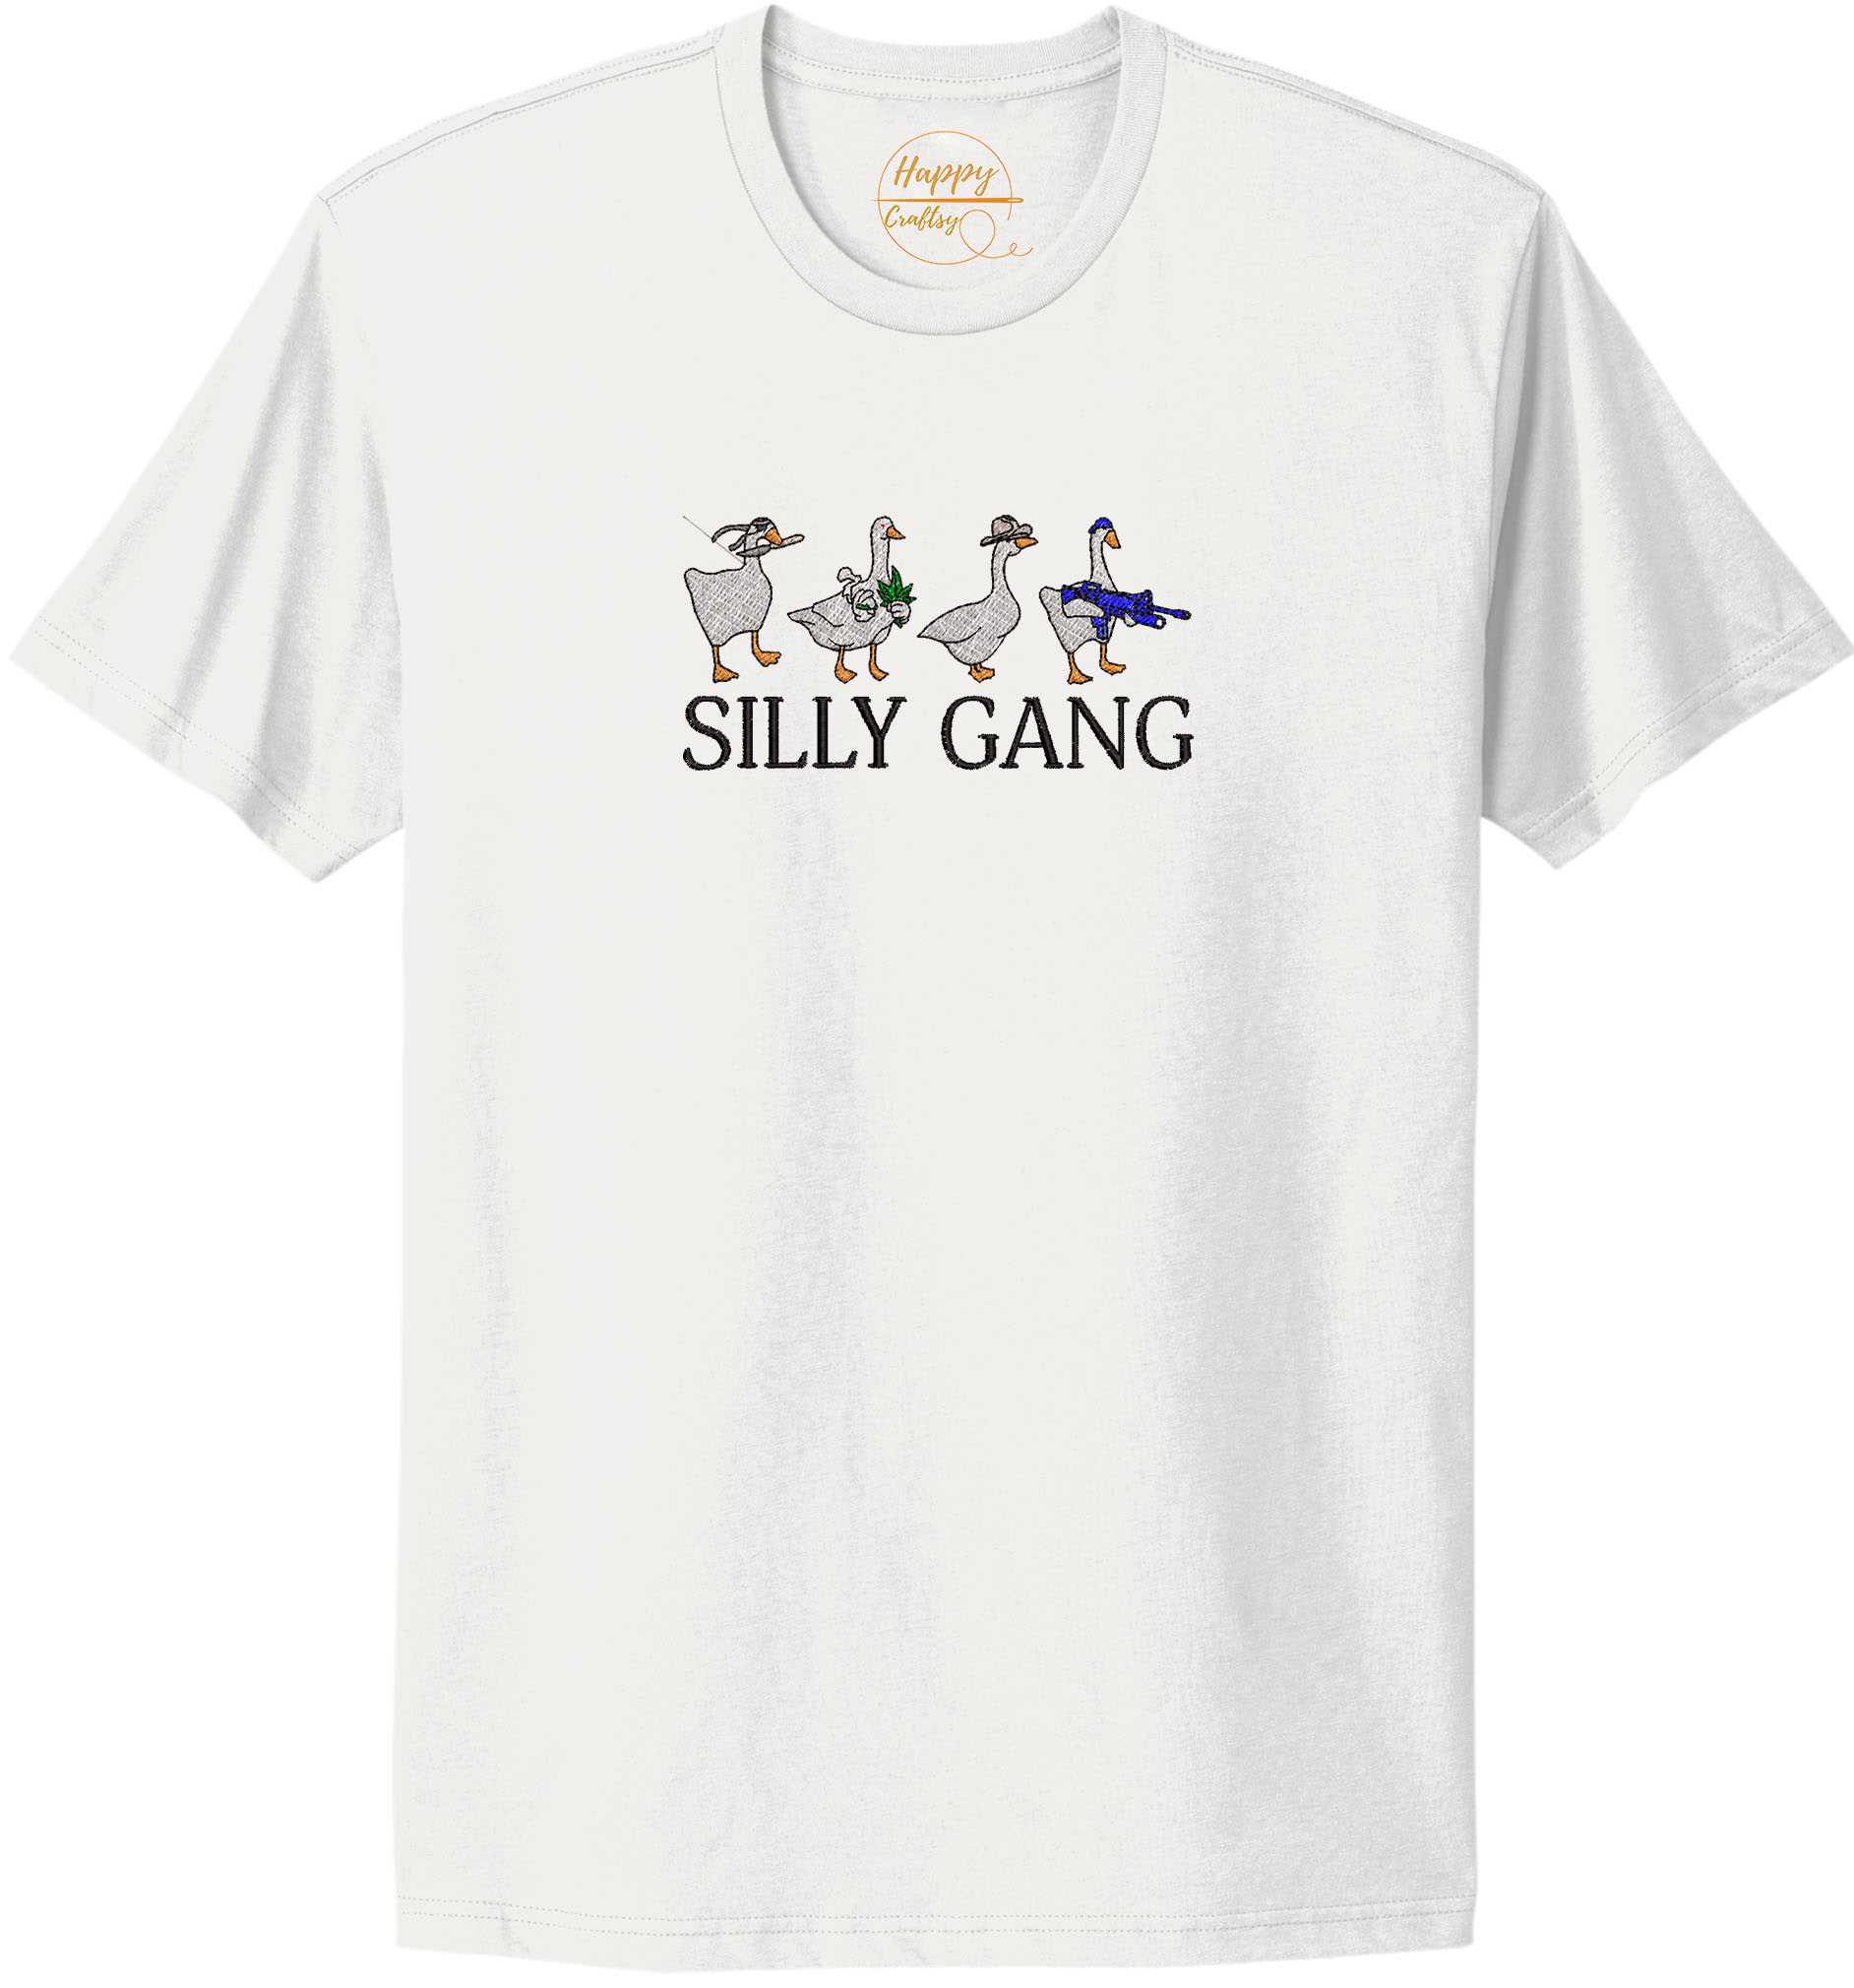 Silly Gang